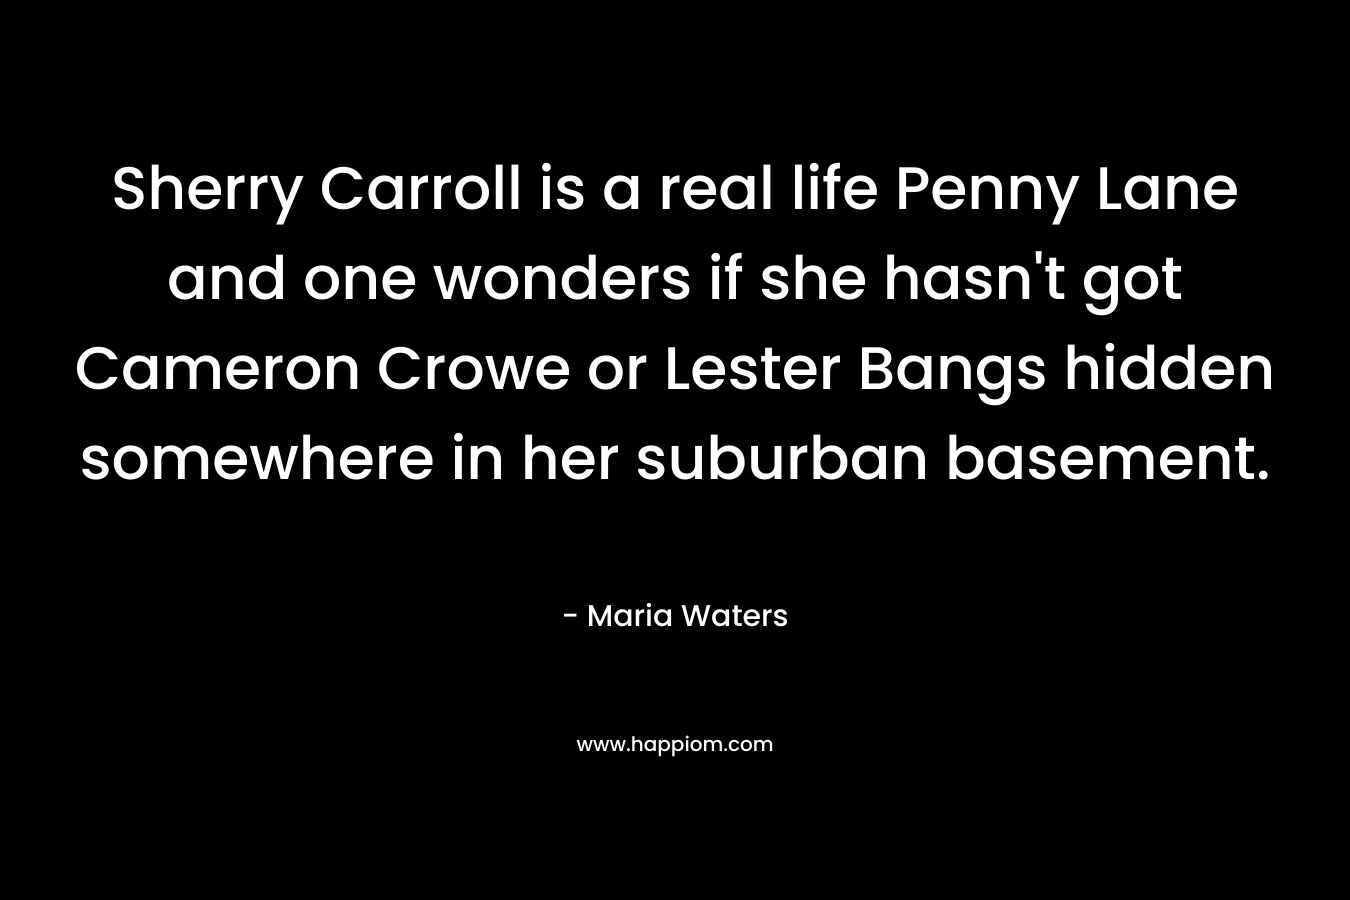 Sherry Carroll is a real life Penny Lane and one wonders if she hasn’t got Cameron Crowe or Lester Bangs hidden somewhere in her suburban basement. – Maria Waters